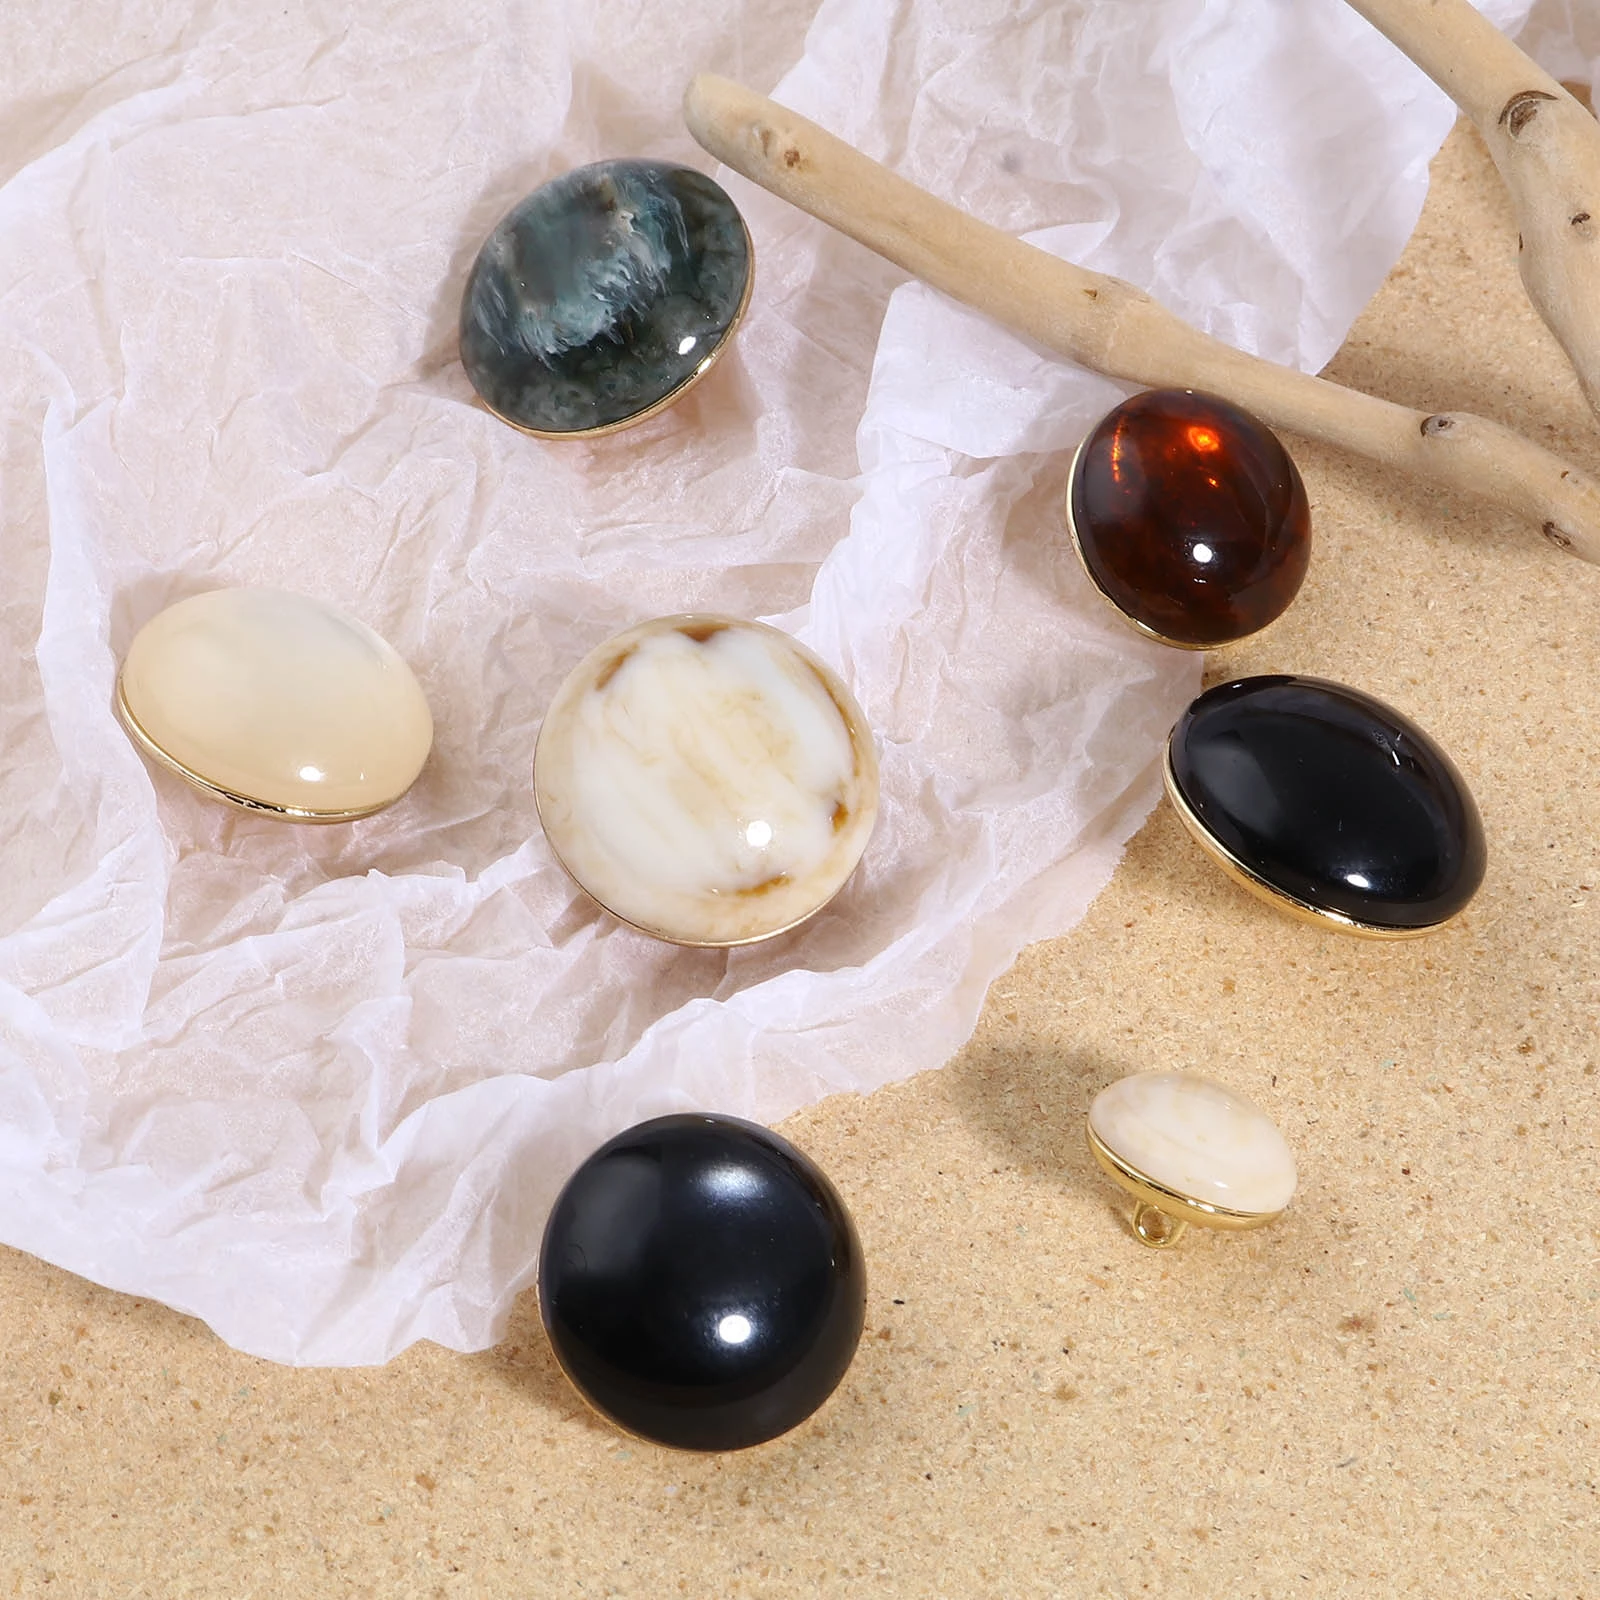 Resin Imitation Natural Stone Ball Shank Buttons Metal Round Clothes Decoration Sewing Button Handmade Garment Accessories